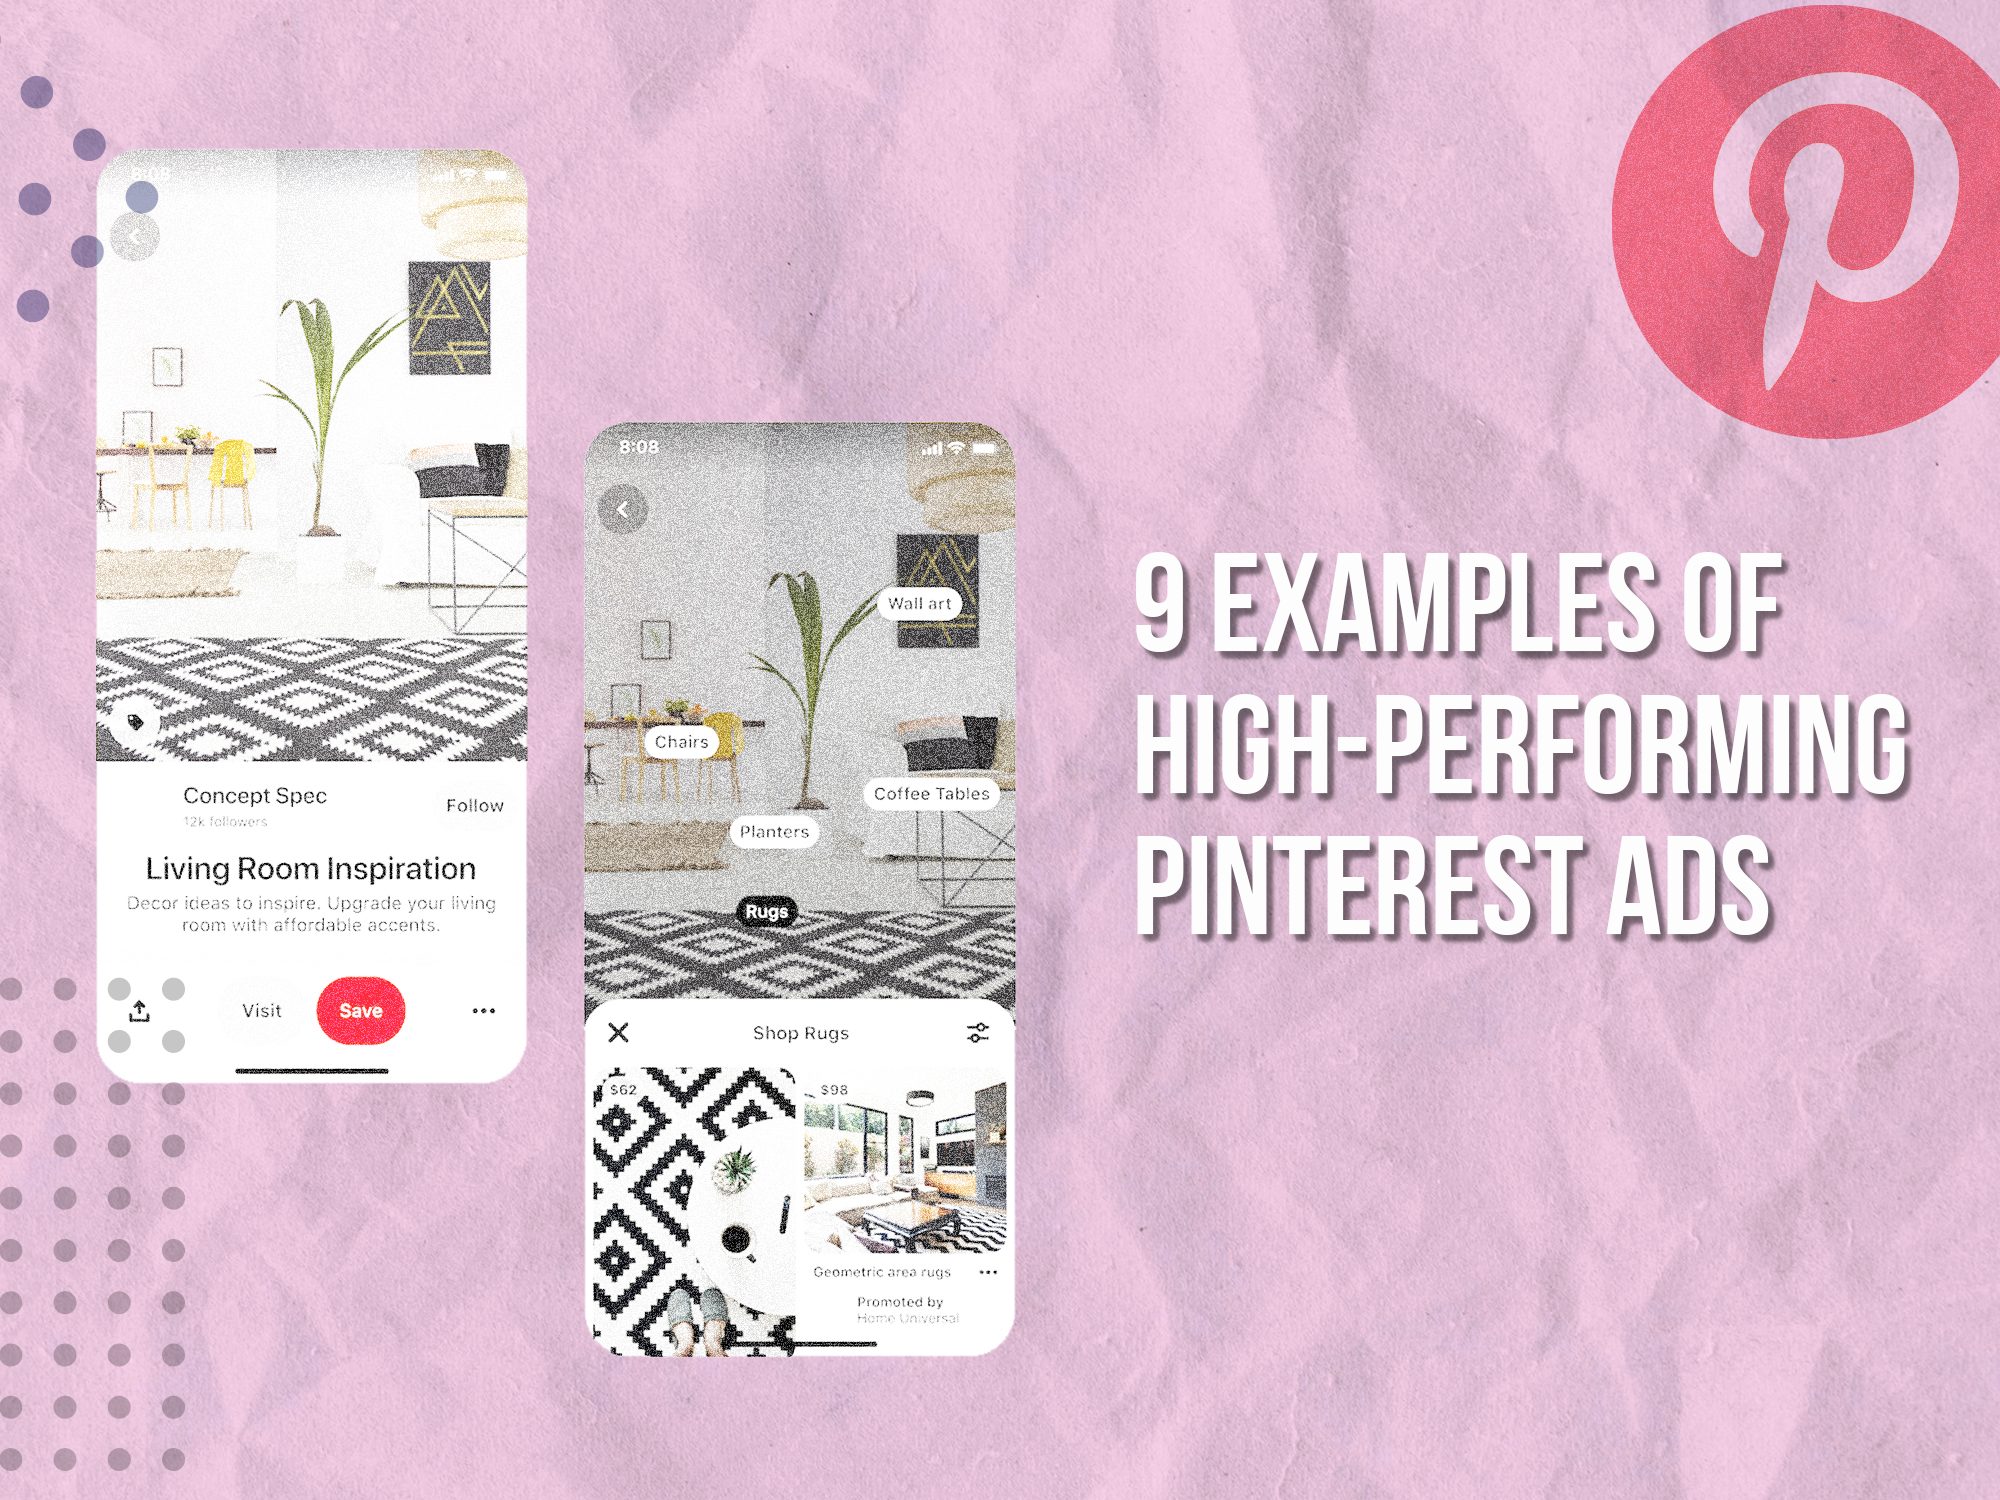 9 Examples Of High-Performing Pinterest Ads